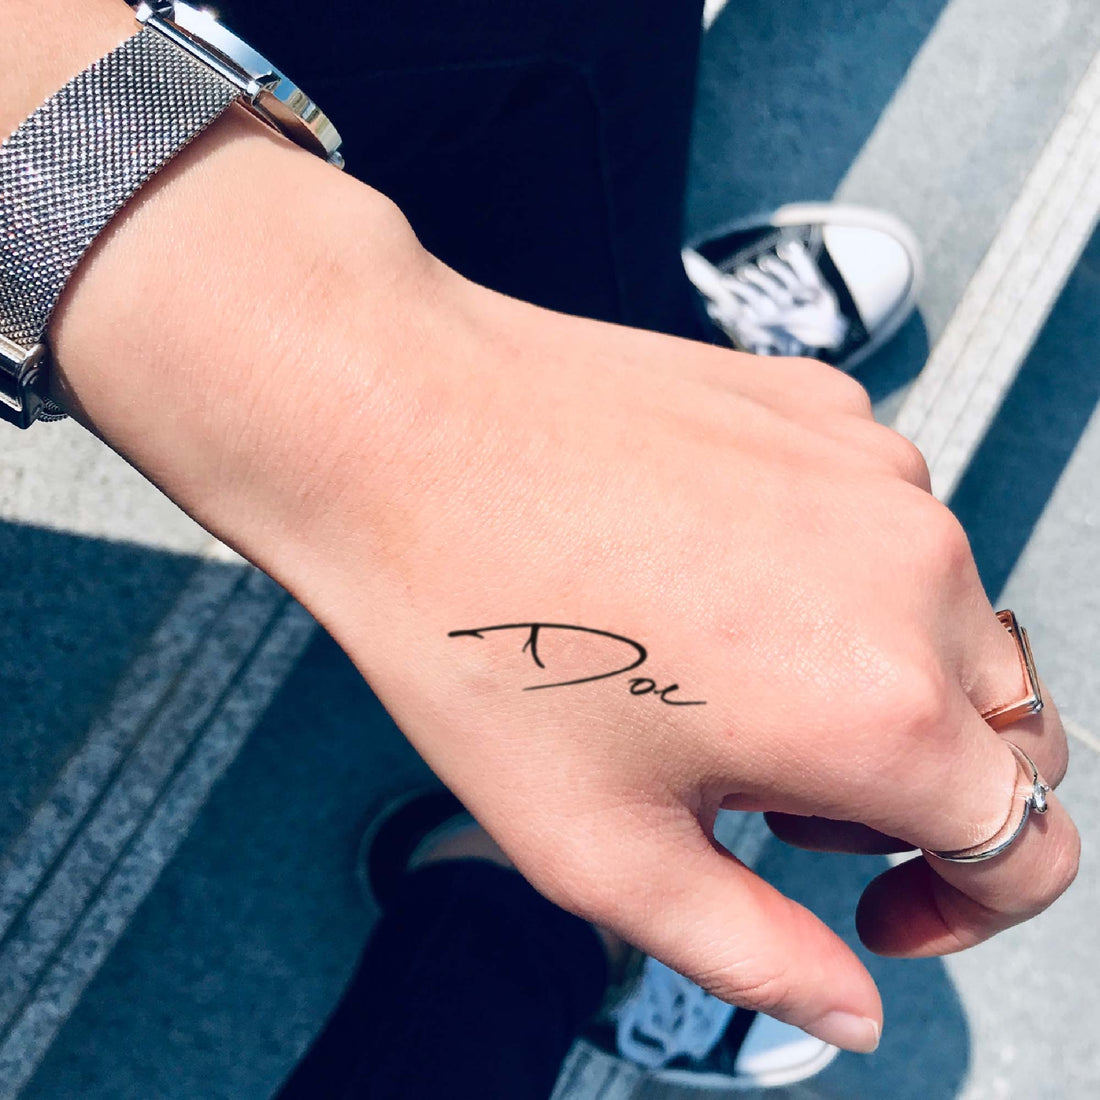 Doe custom temporary tattoo sticker design idea inspiration meanings removal arm wrist hand words font name signature calligraphy lyrics tour concert outfits merch accessory gift souvenir costumes wear dress up code